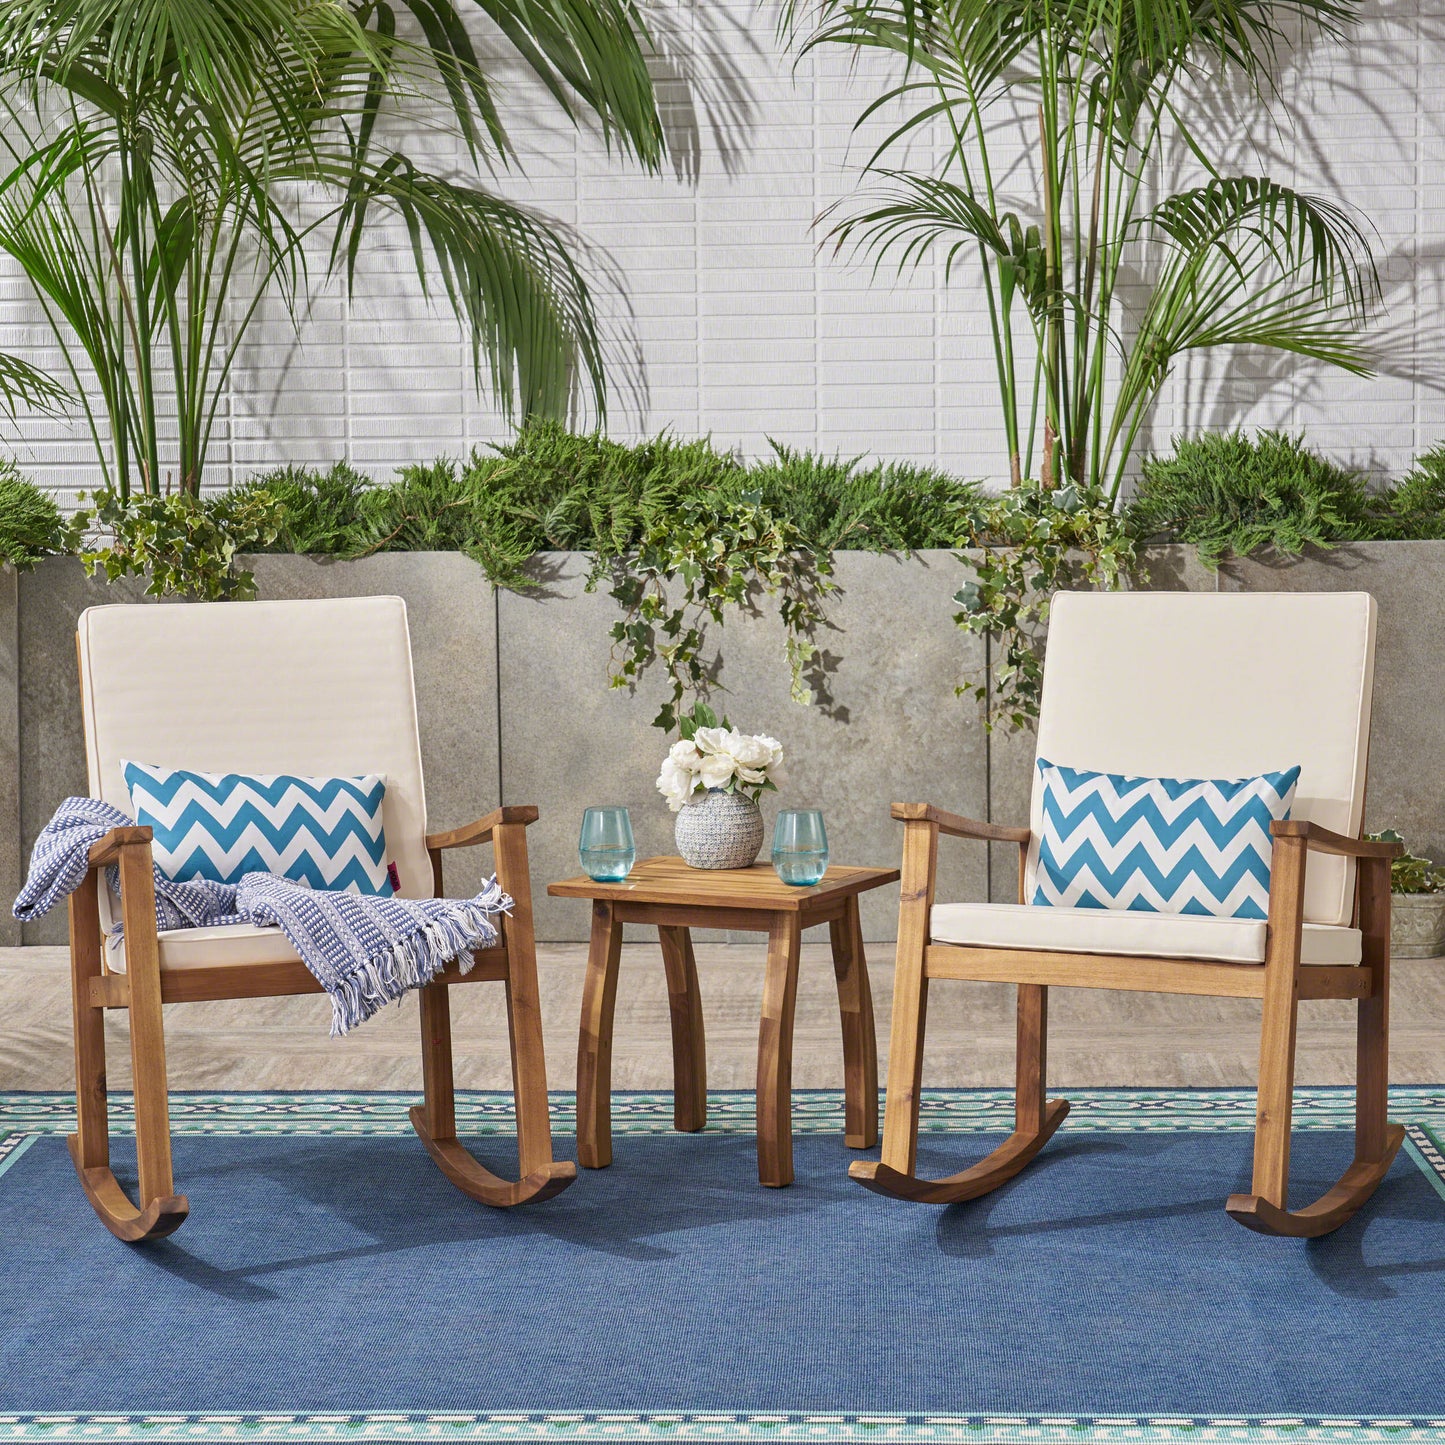 Aeney Outdoor Acacia Wood Rocking Chair and Table Set